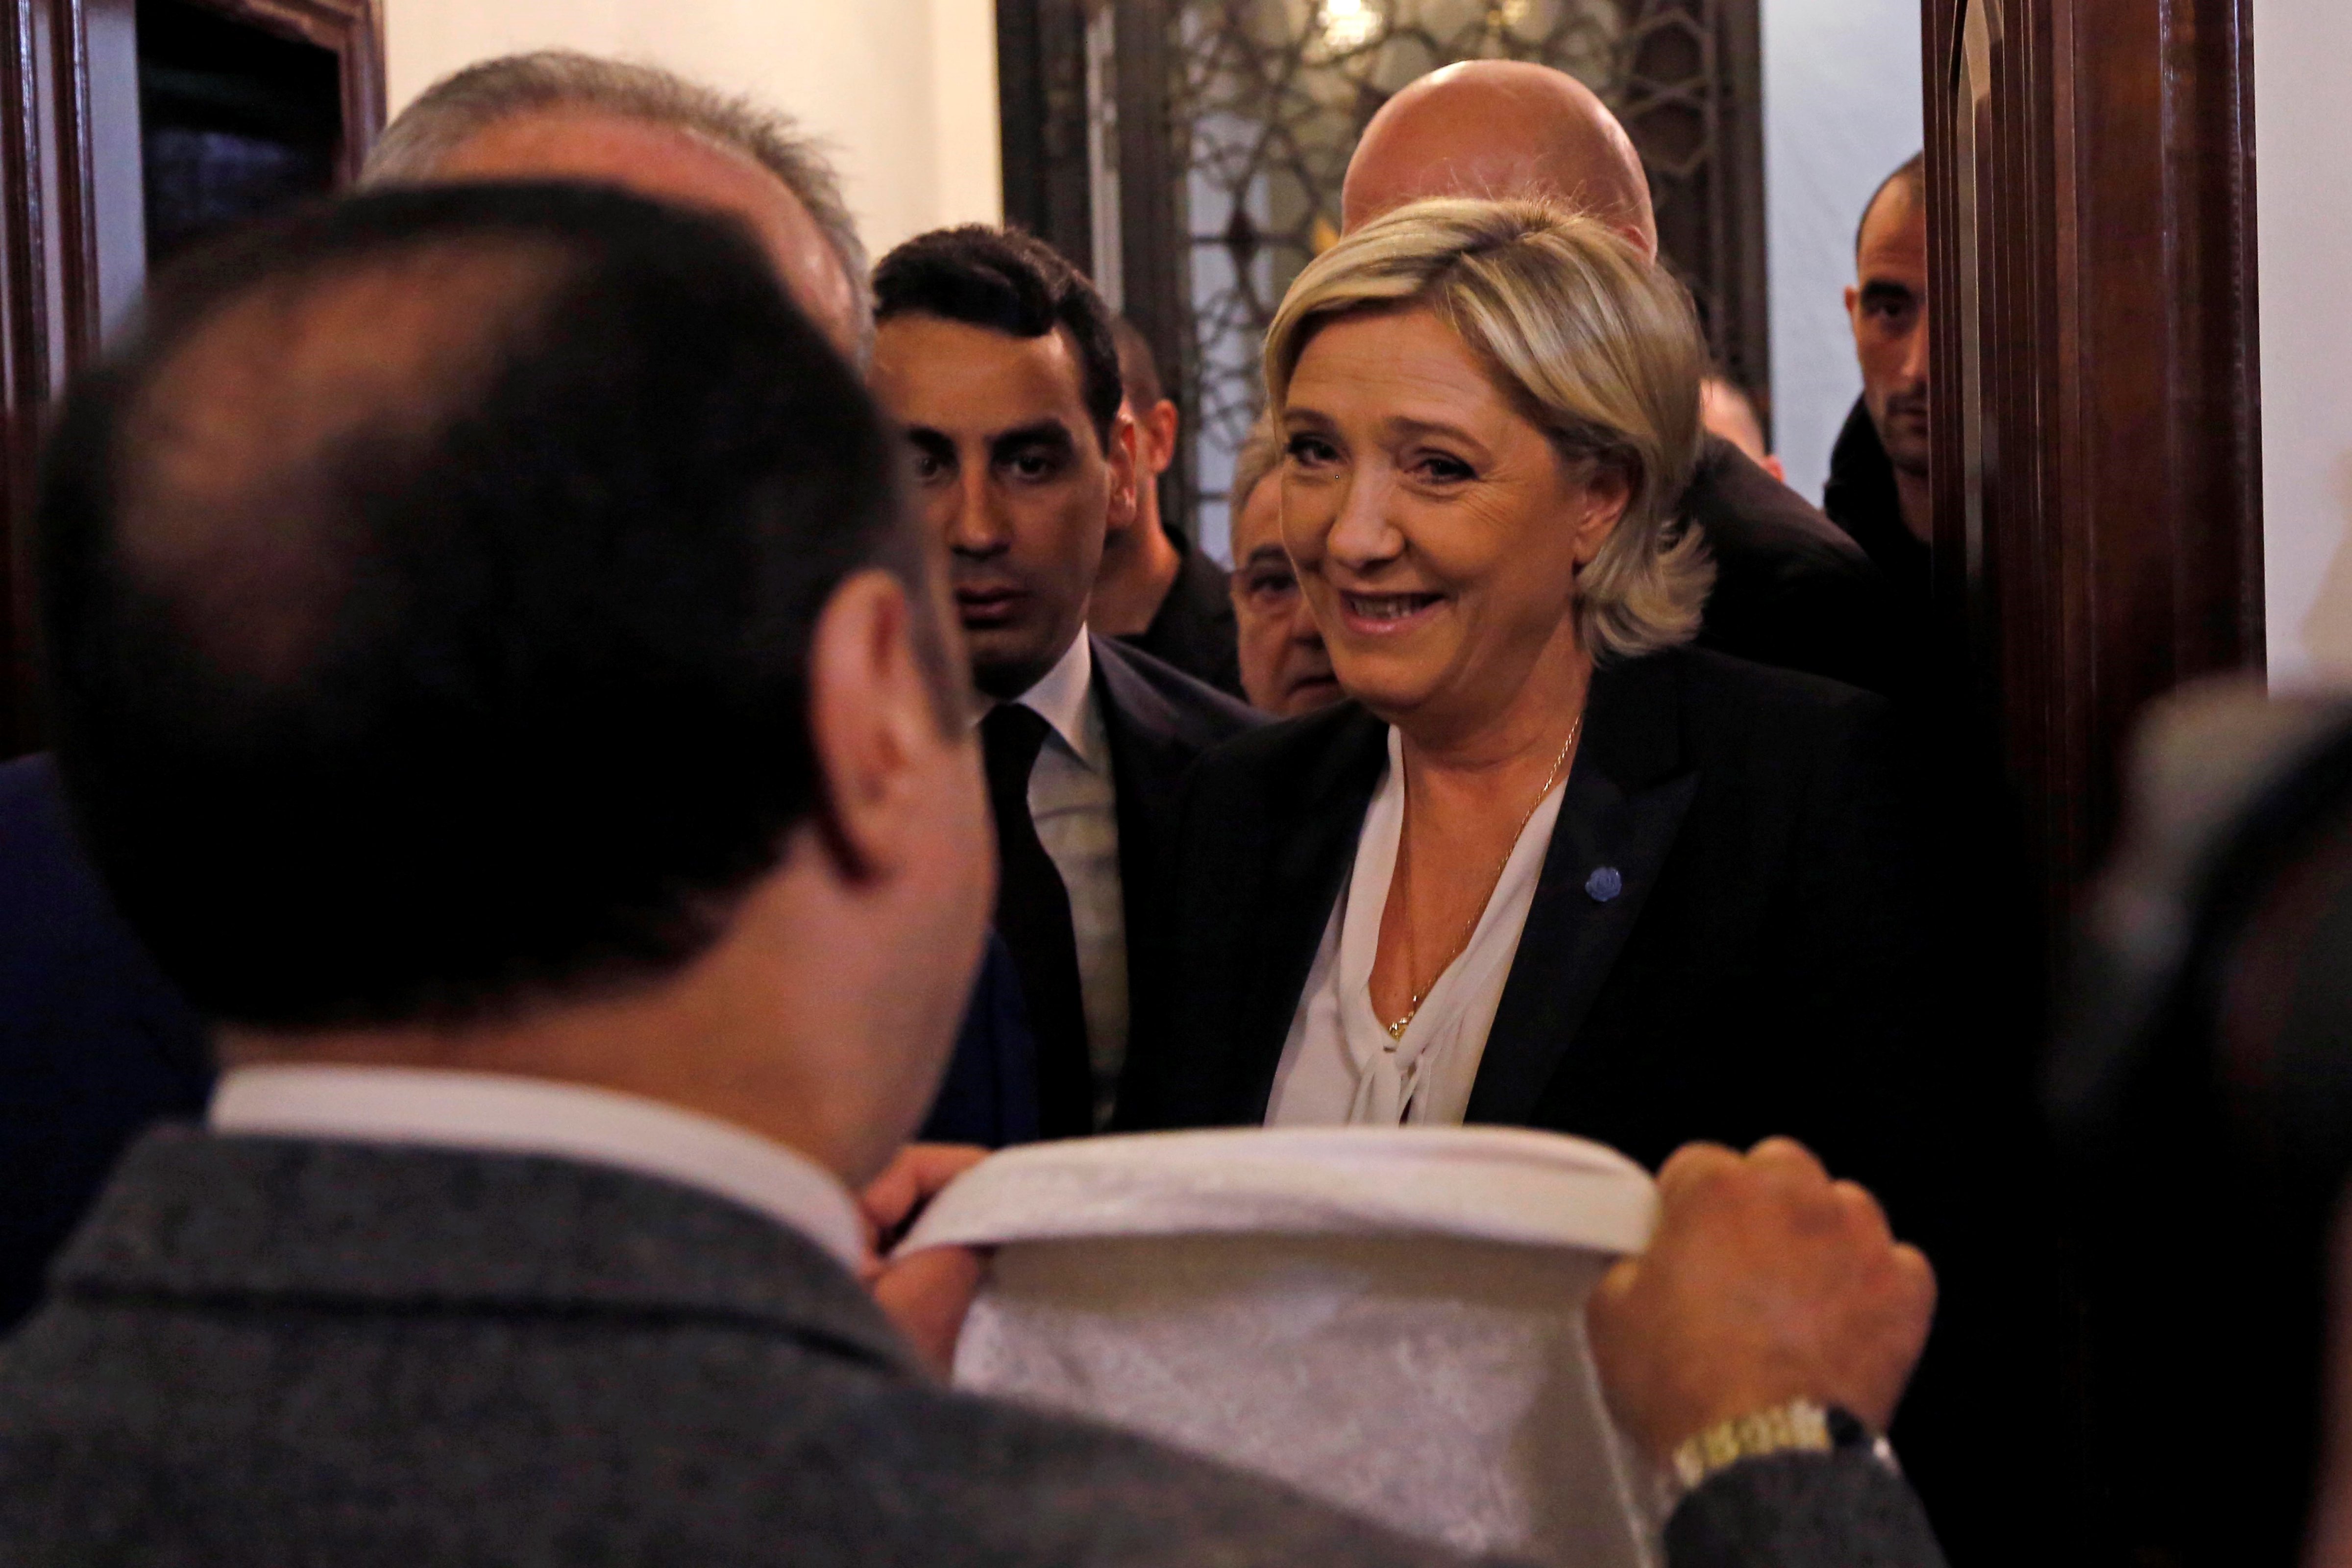 The leader of France's far-right Front National political party and presidential candidate, Marine Le Pen (C) refuses to wear headscarf before her meeting with Lebanon's Grand Mufti Sheikh Abdul Latif Derian, in Beirut, Lebanon on February 21, 2017.